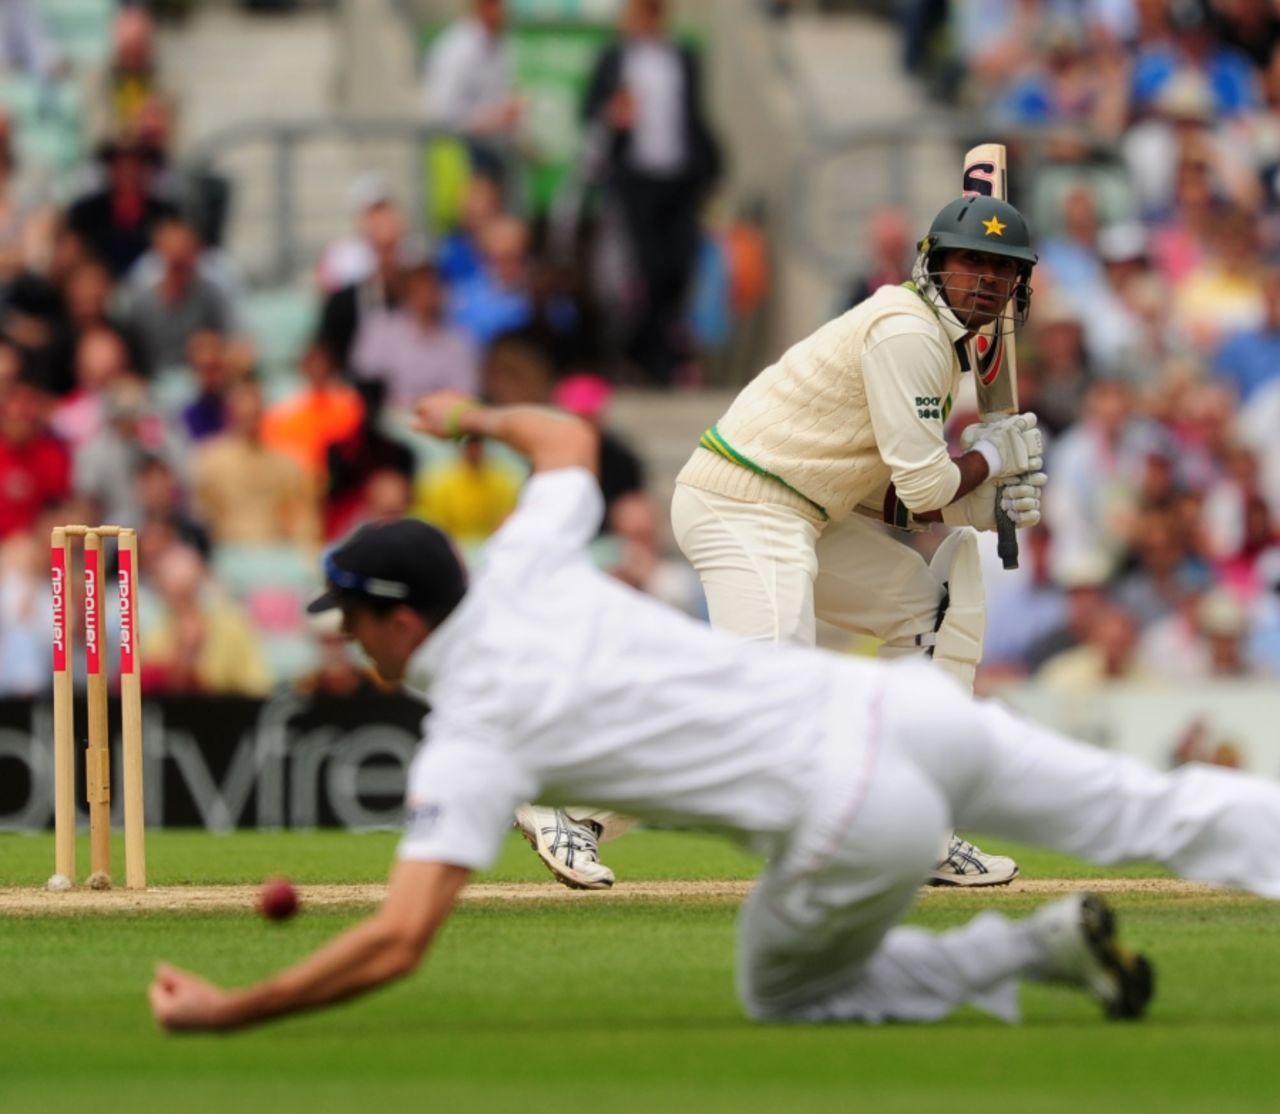 Wahab Riaz scored most of his runs behind square on the off side, England v Pakistan, 3rd Test, The Oval, August 19, 2010